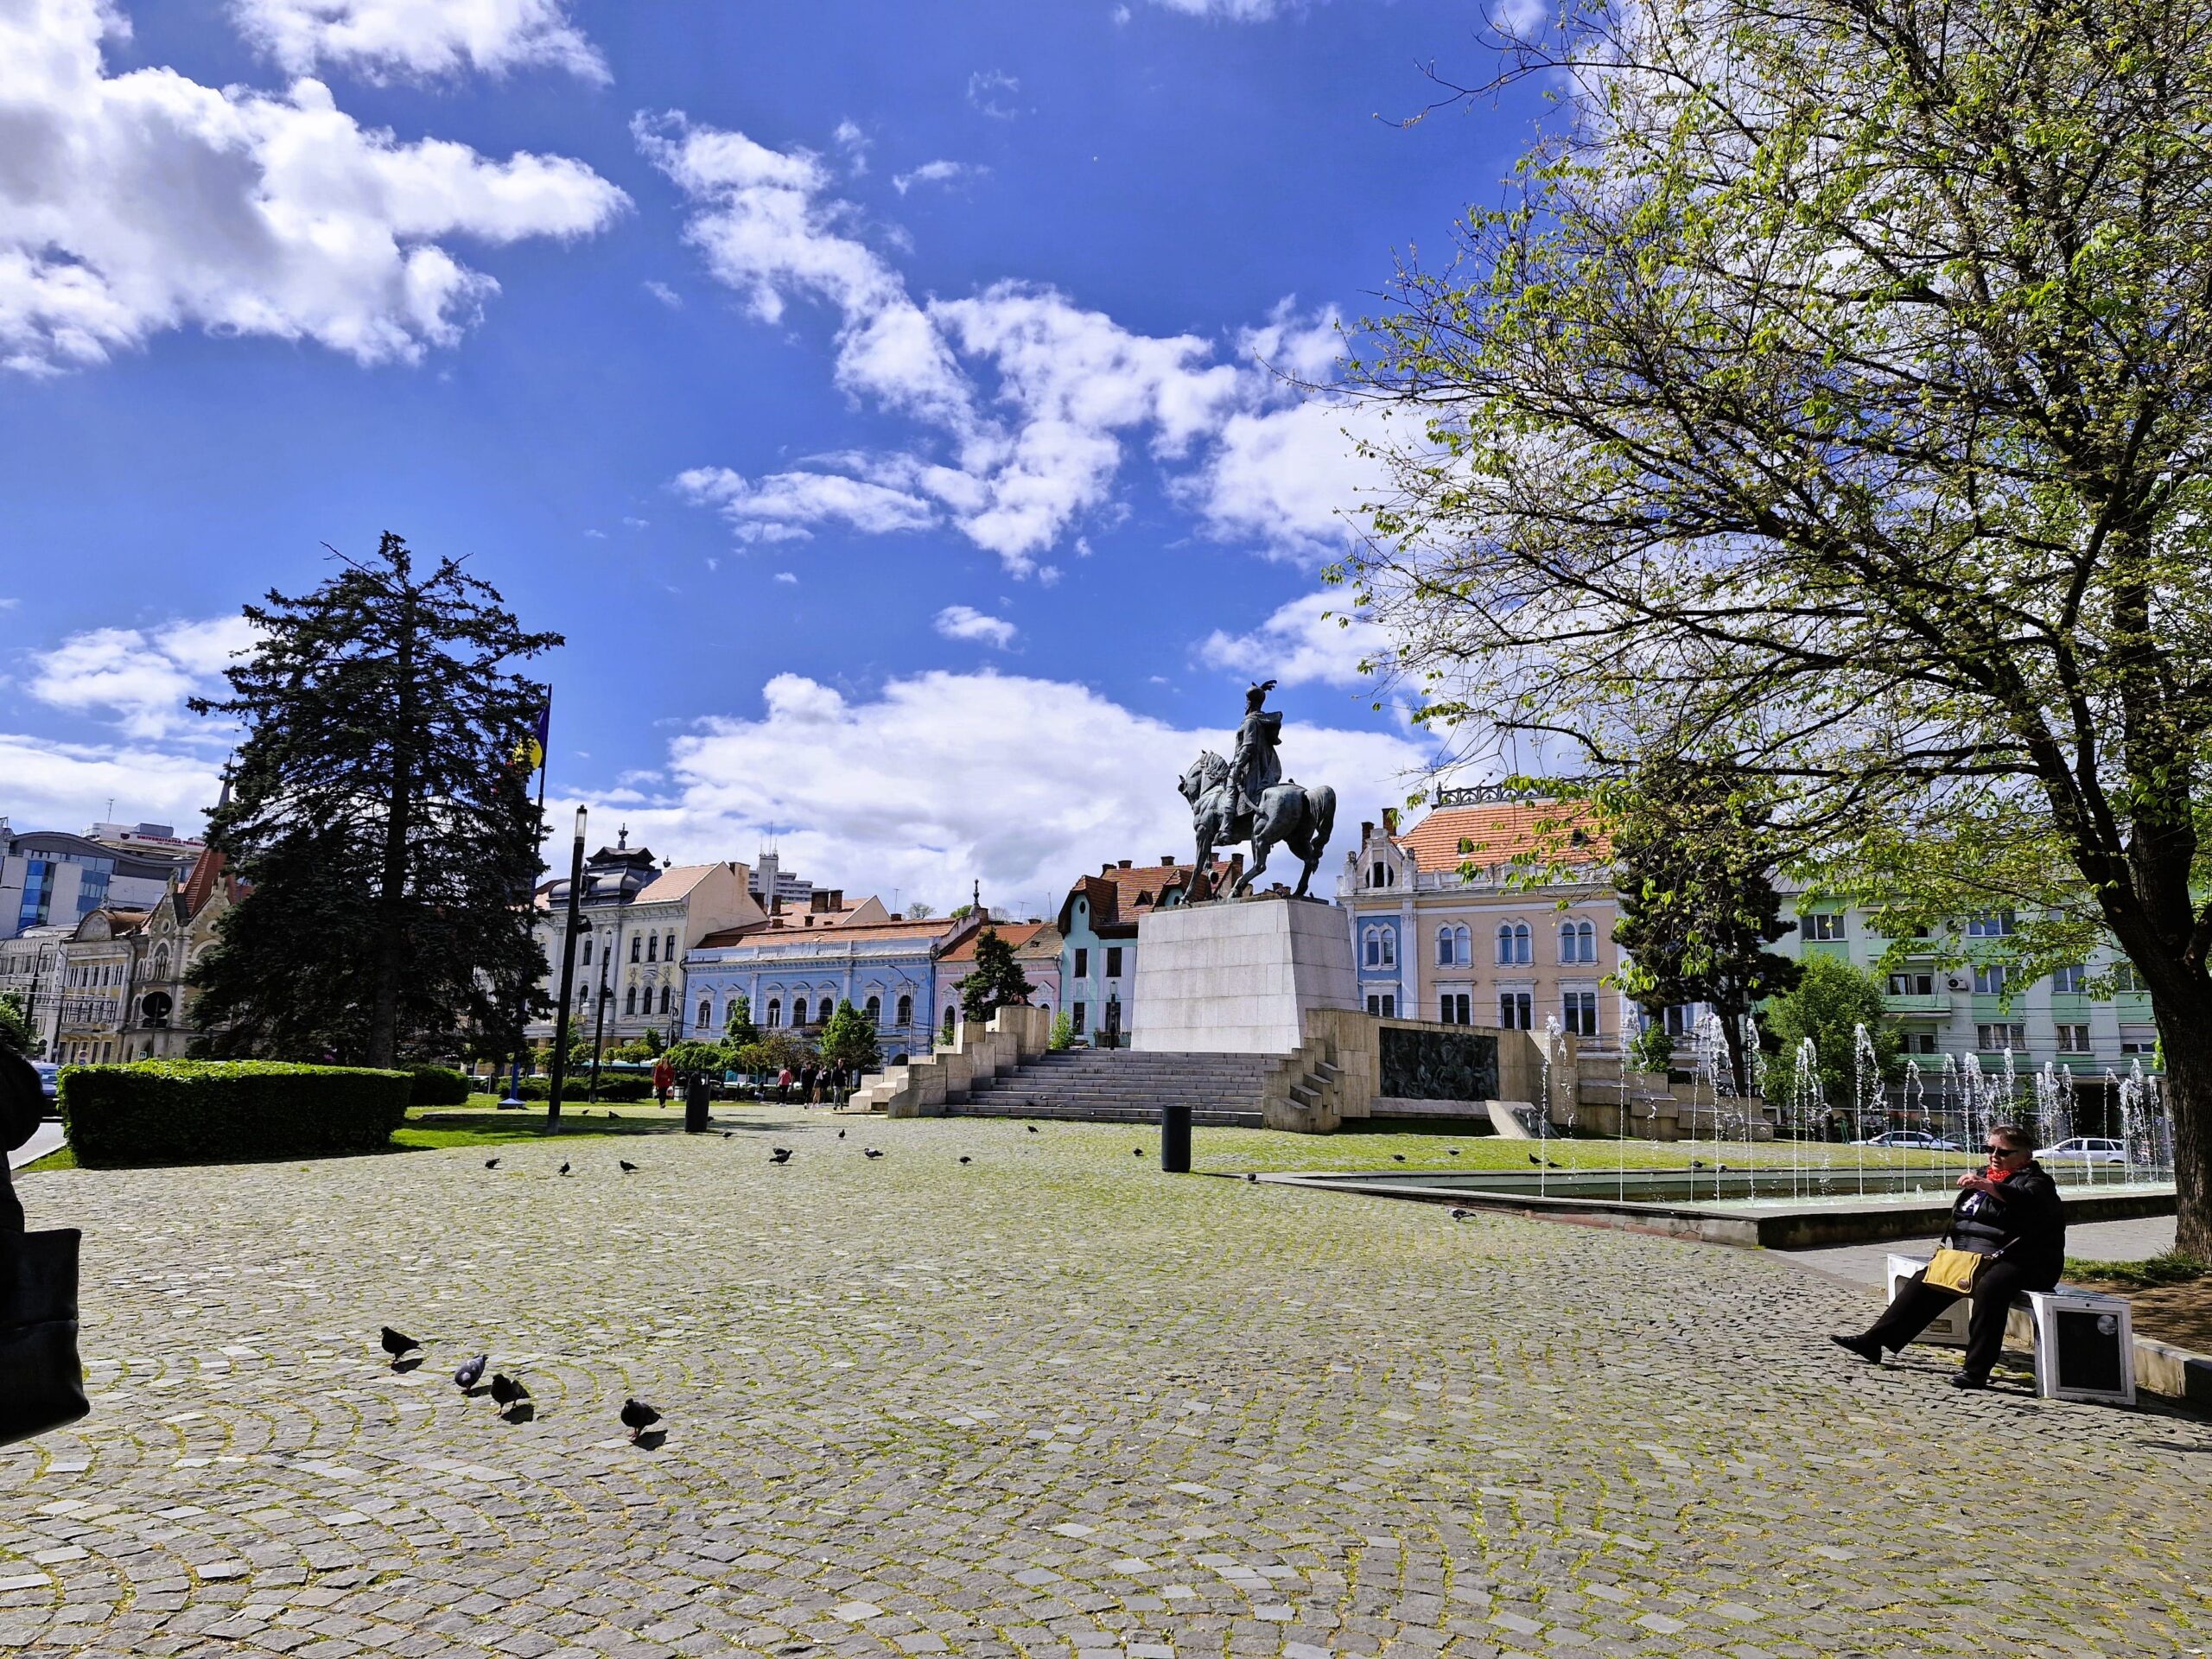 A mounted horse statue takes centre stage in this deserted square in Cluj, Romania.